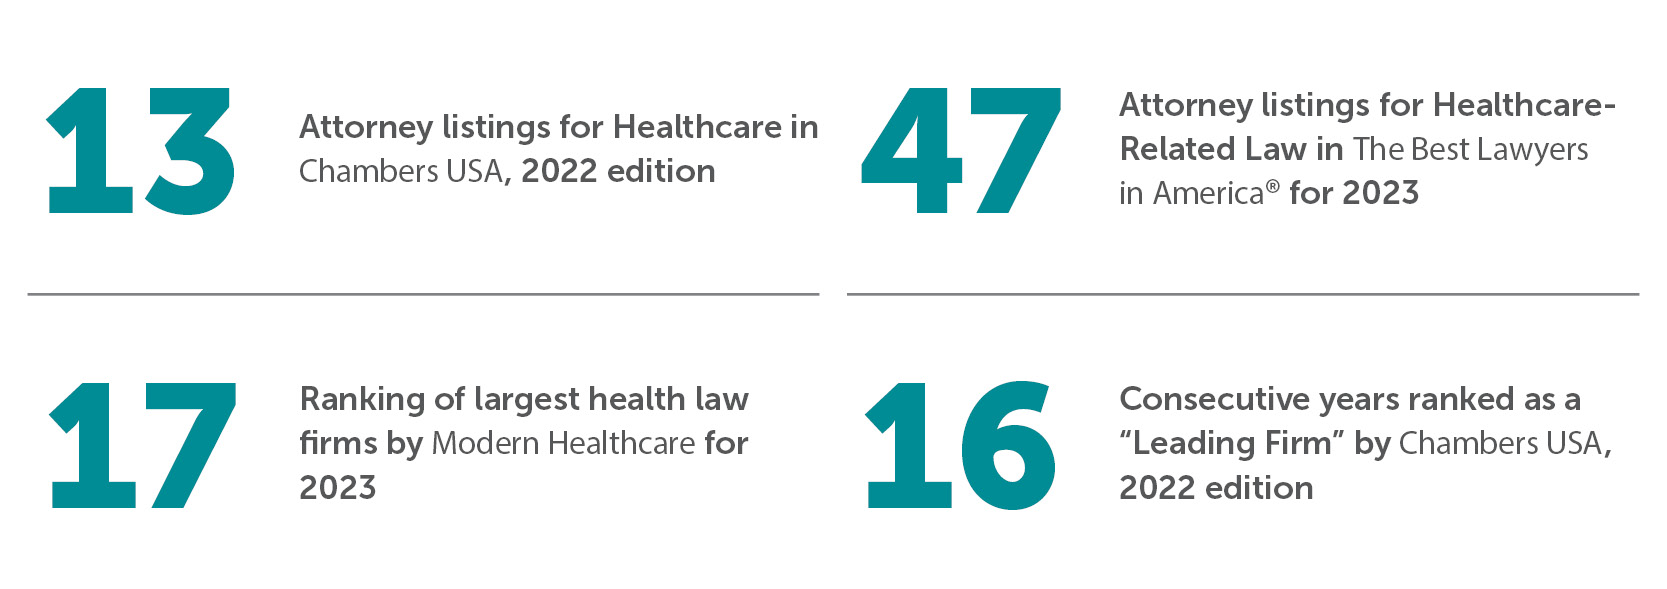 Bradley By The Numbers Healthcare